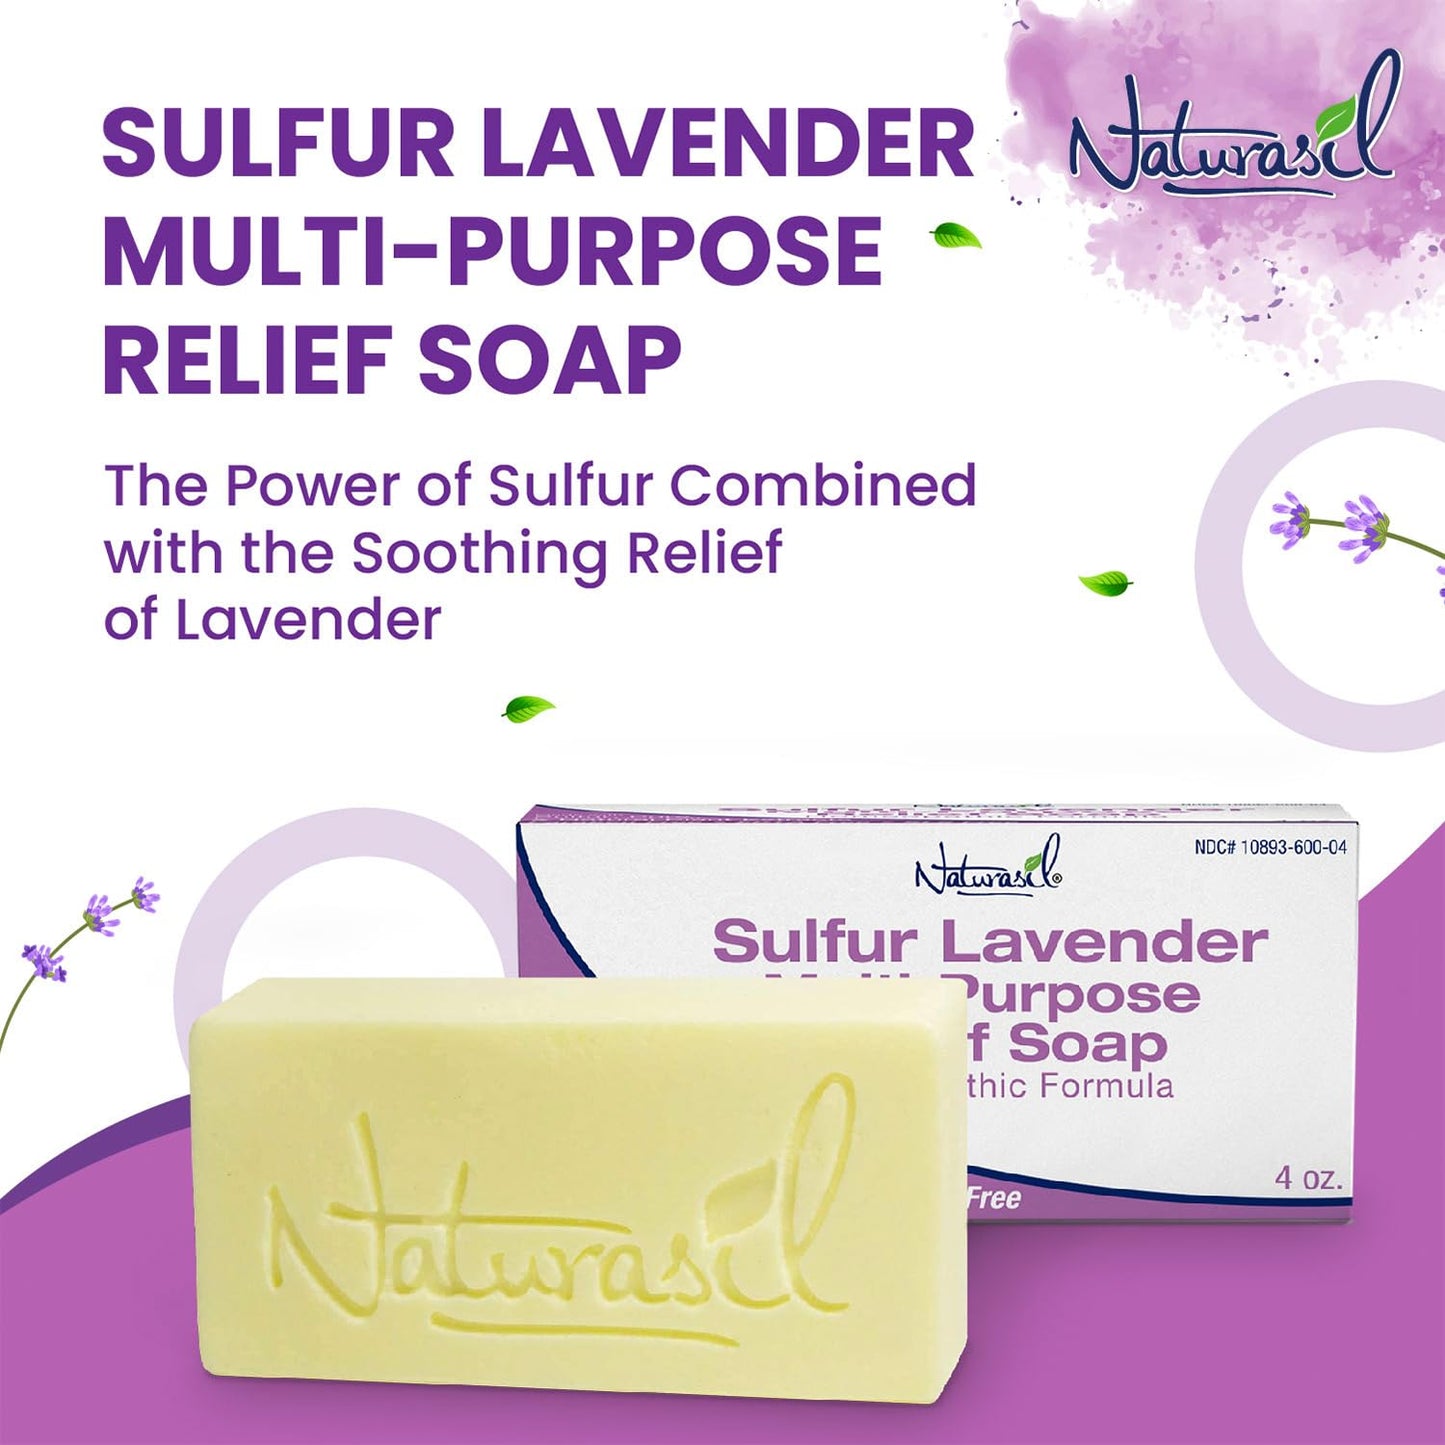 Naturasil Fast-Acting 10% Sulfur Lavender Formulated Soap Skin Relief from Acne, Bug Bites, Warts Treatment, Viral Bumps, Nodes & Itching | All Natural, Kid Friendly, Body & Face Wash | 113 Grams